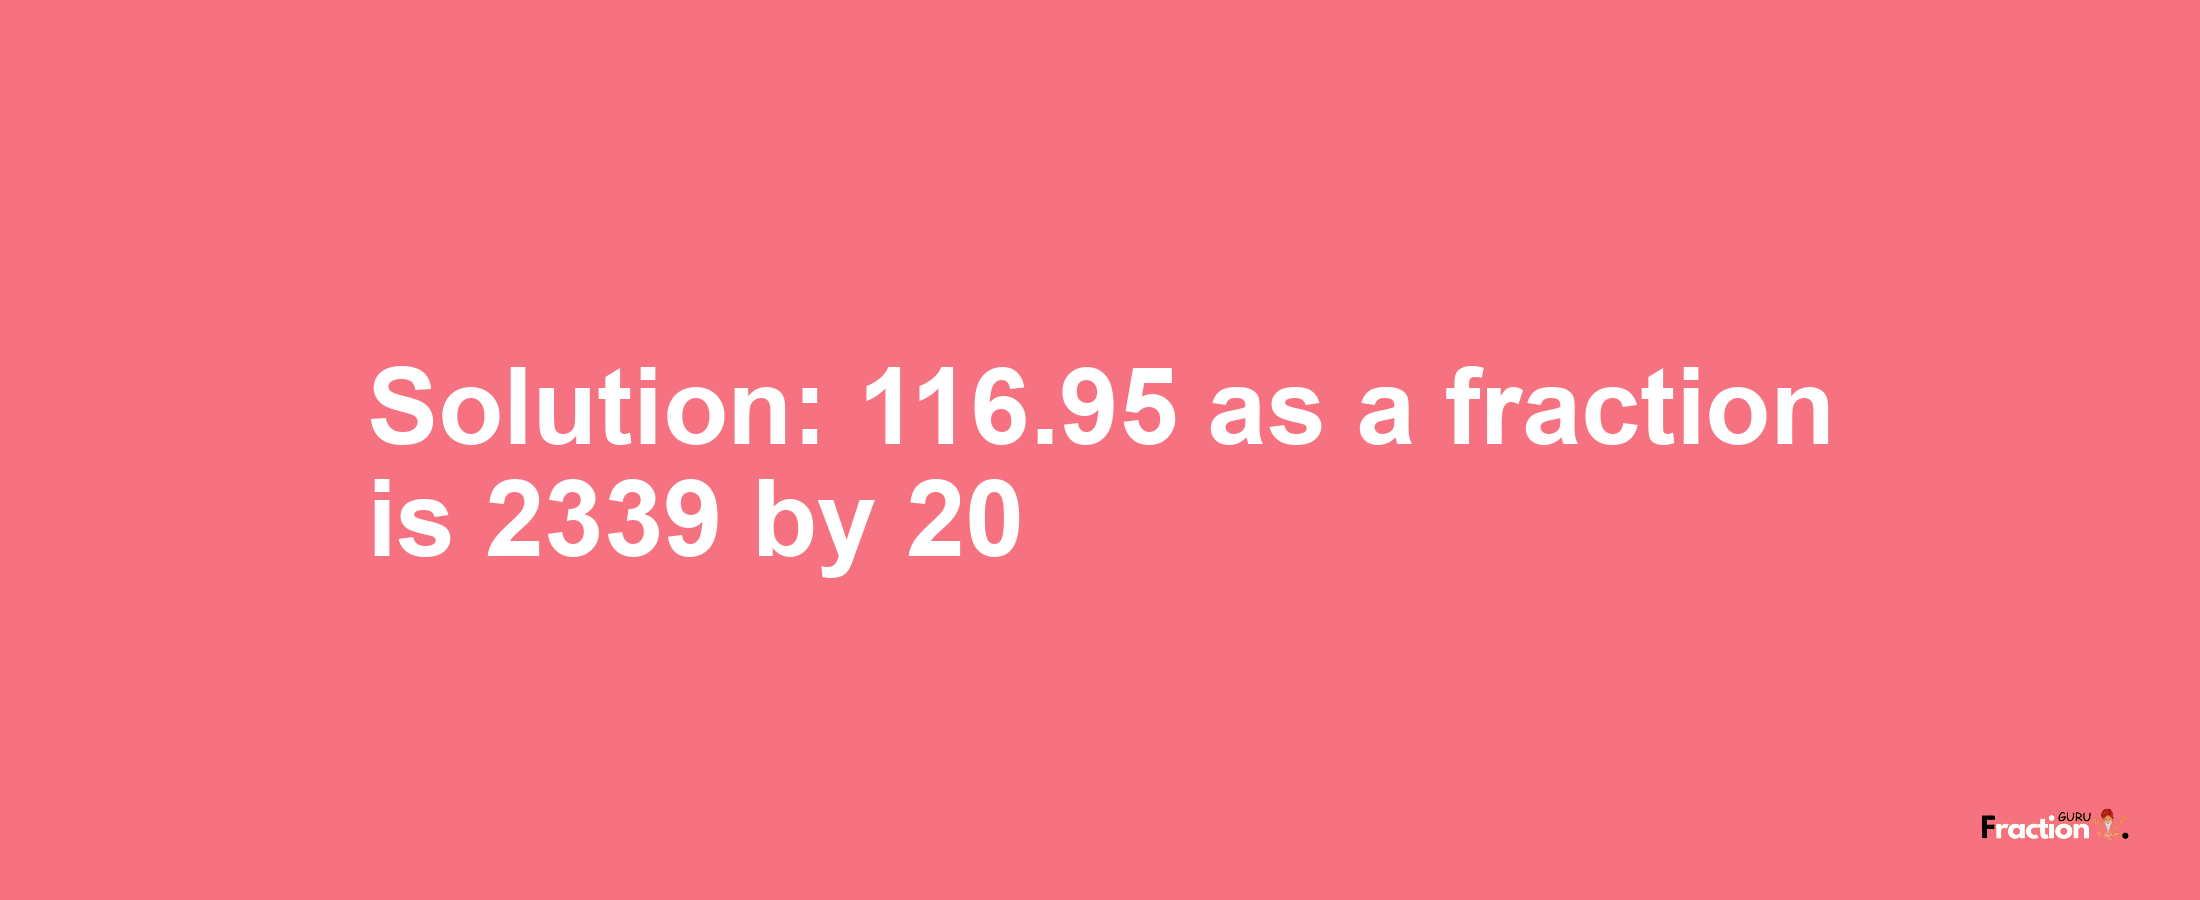 Solution:116.95 as a fraction is 2339/20